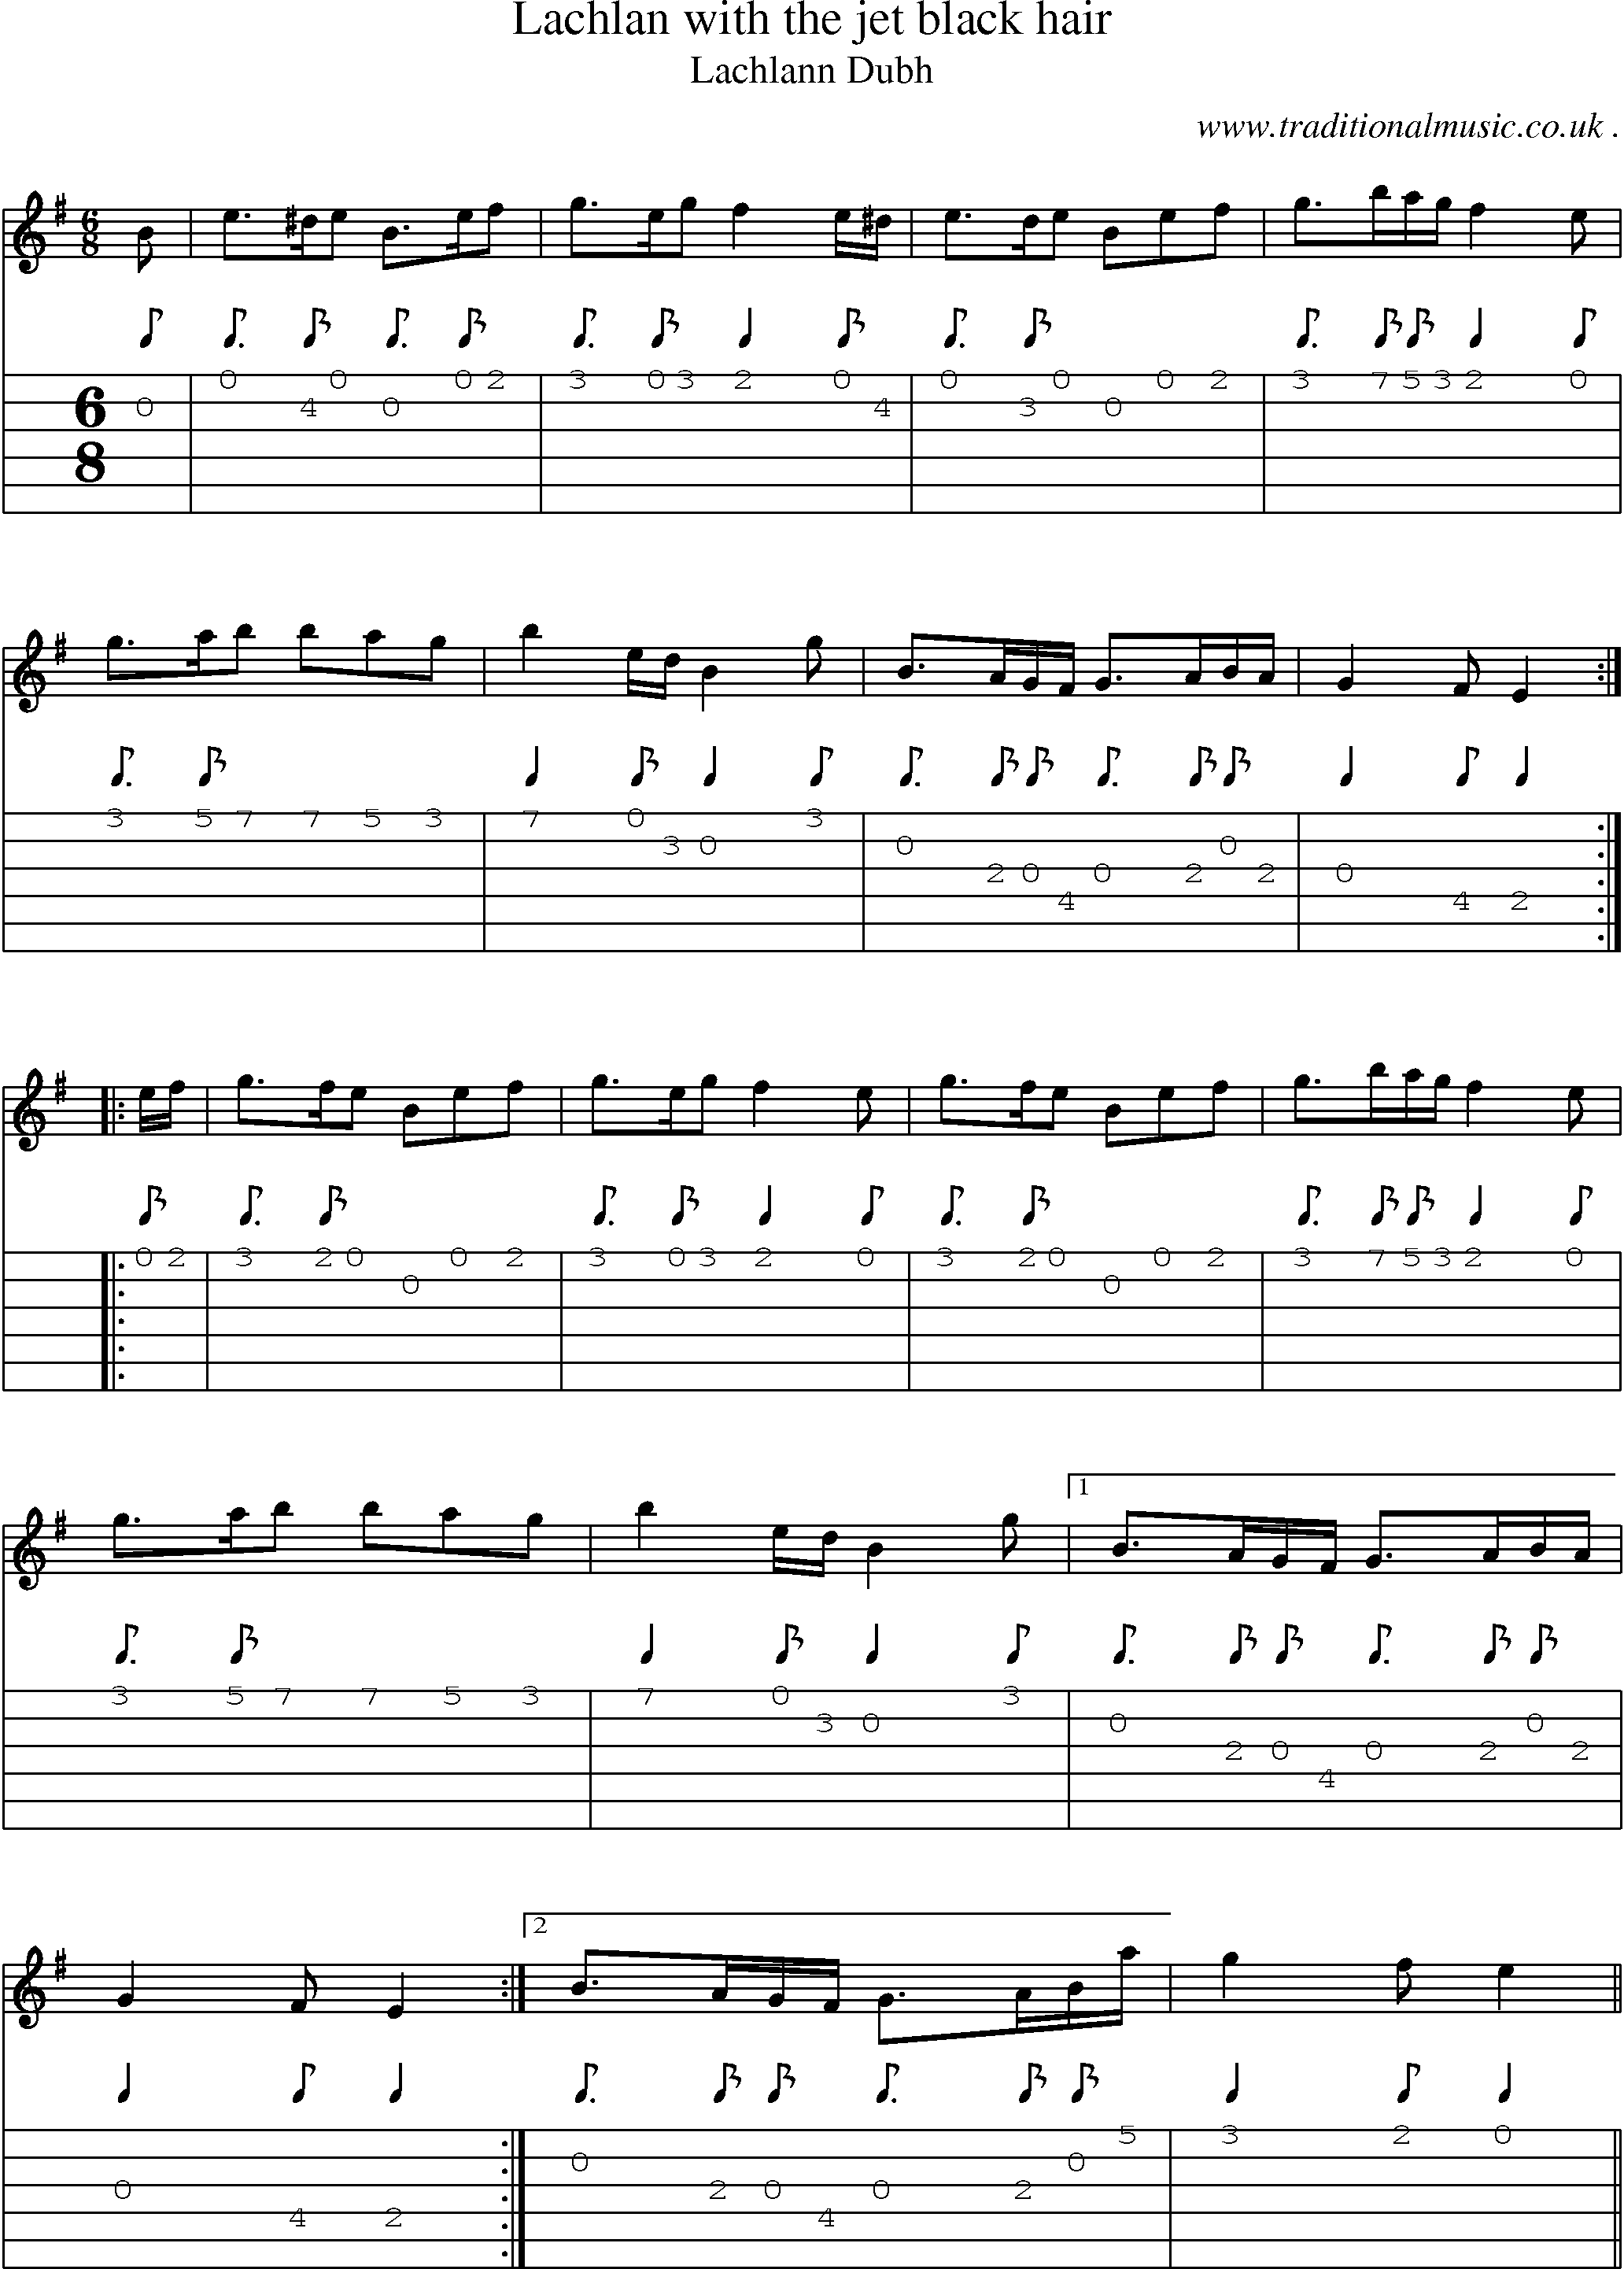 Sheet-music  score, Chords and Guitar Tabs for Lachlan With The Jet Black Hair